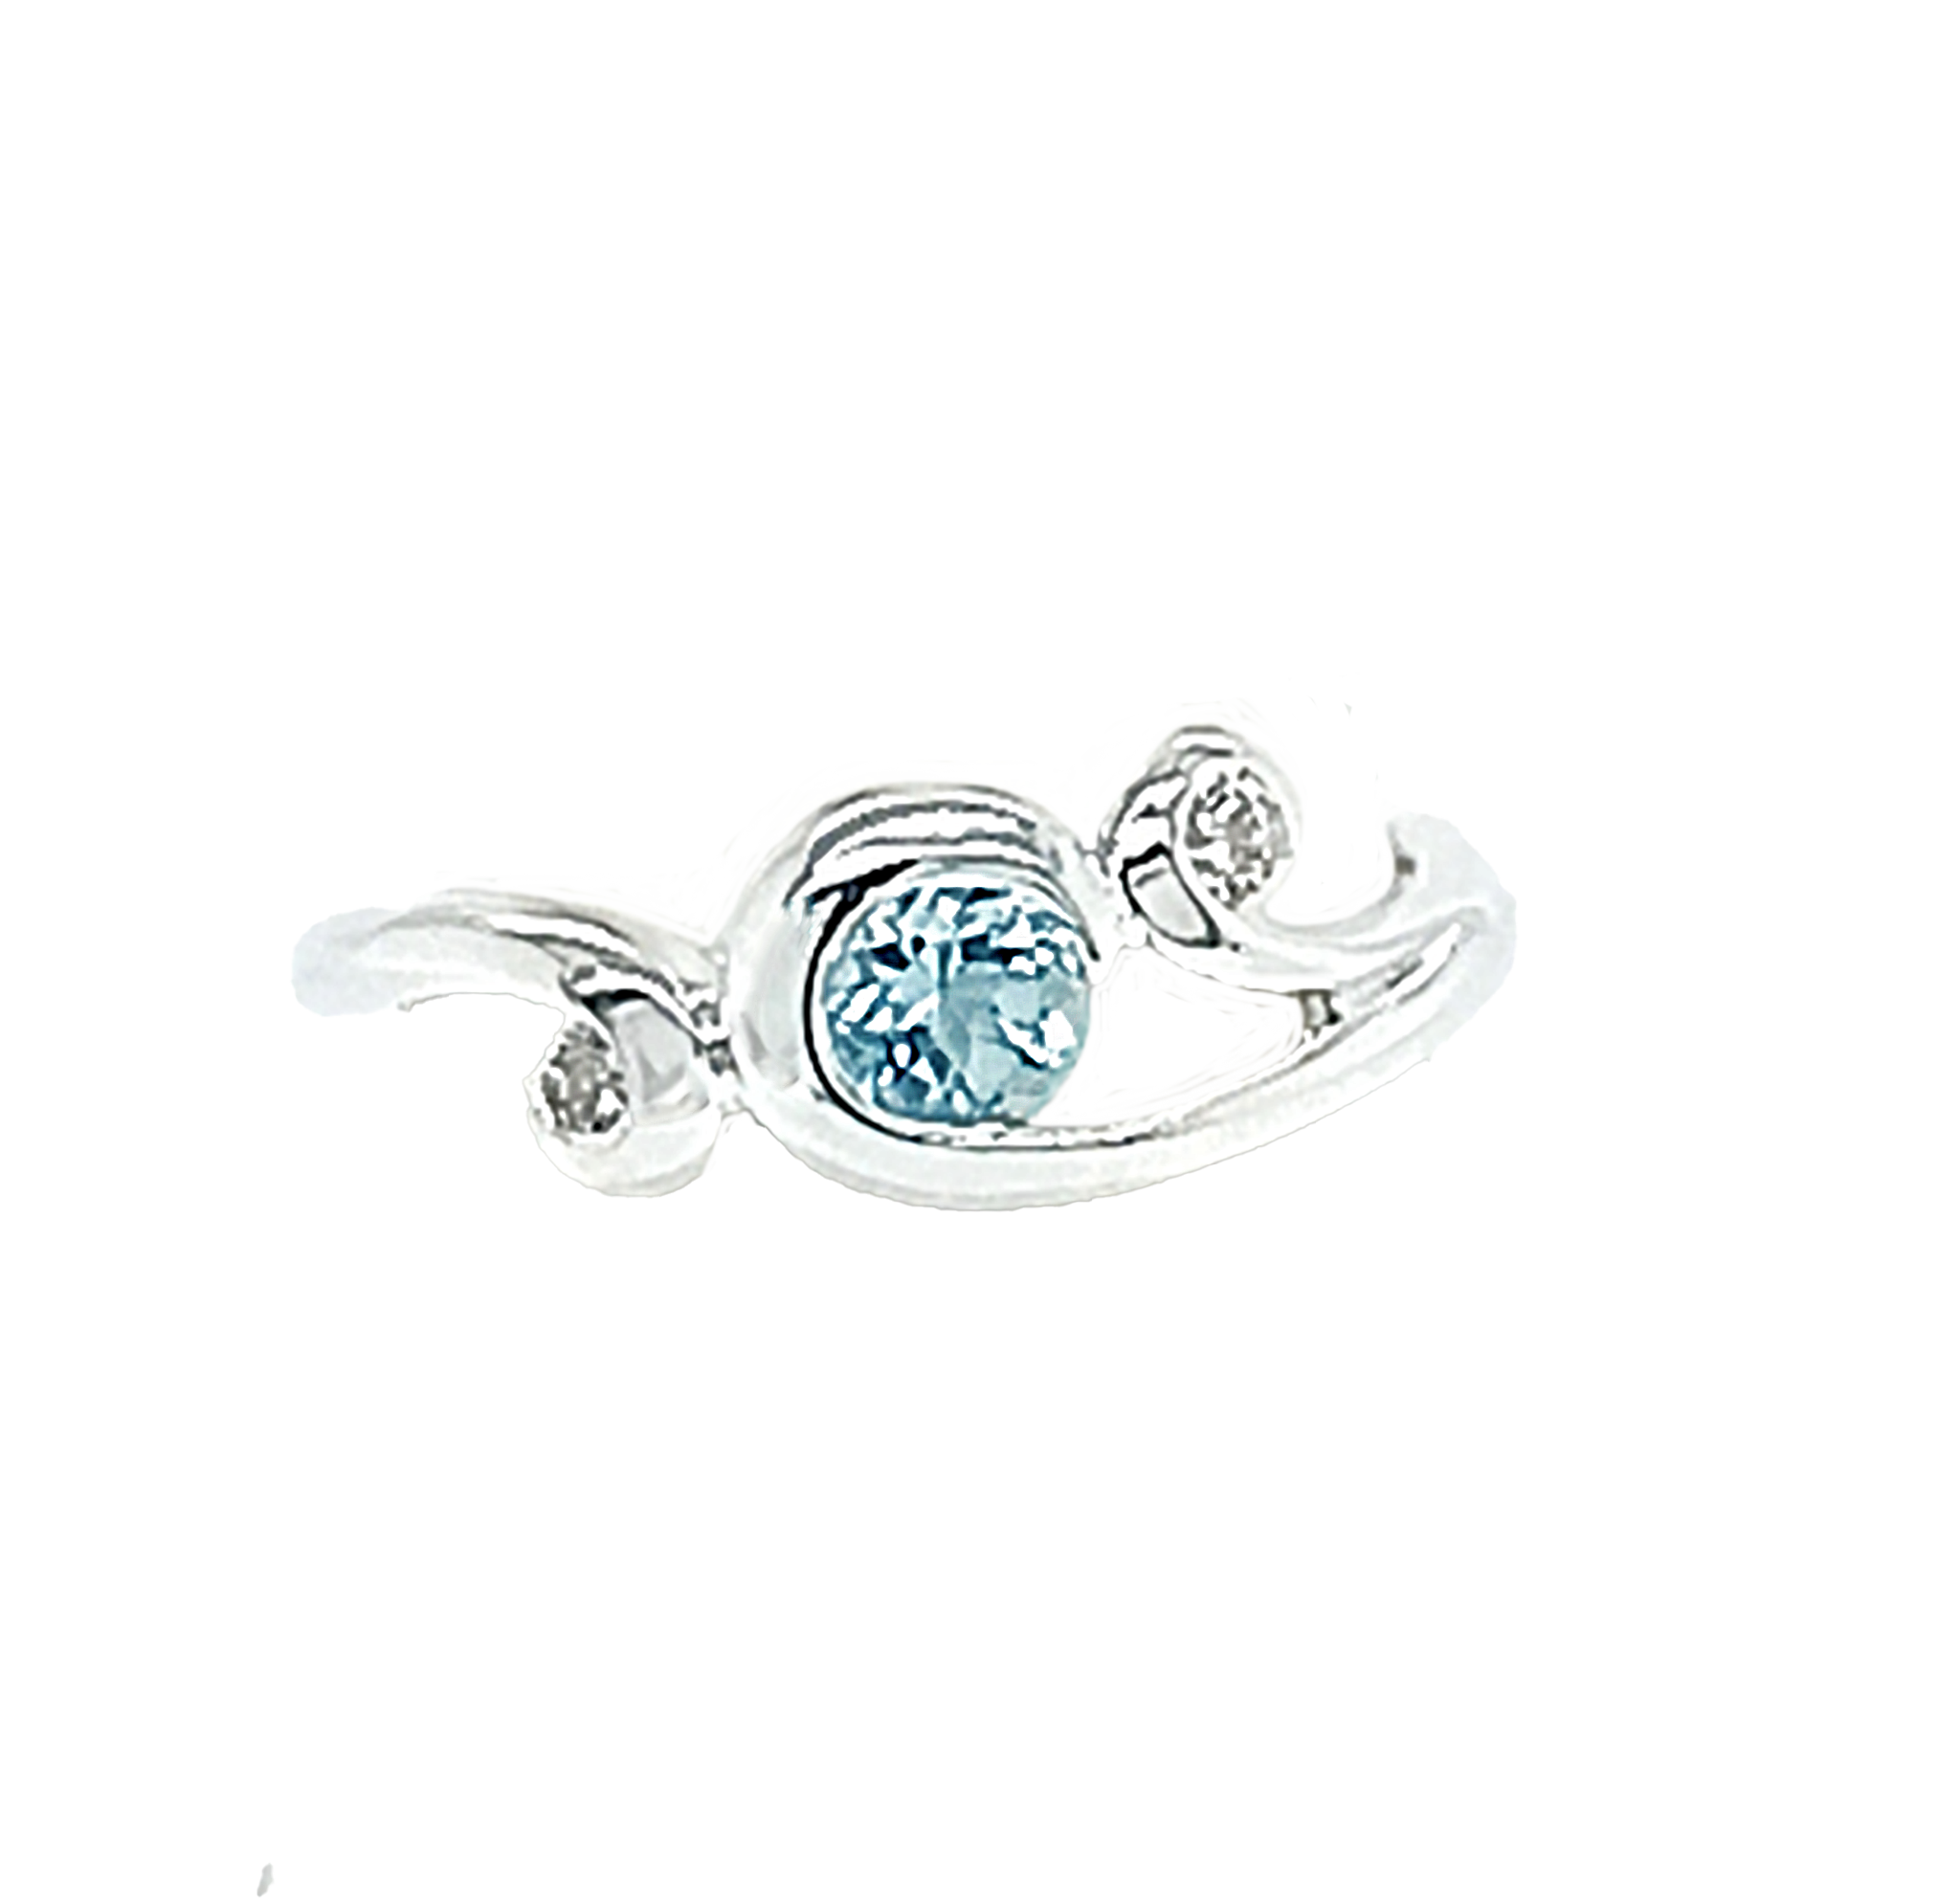 Silver, blue topaz and cz curly ring